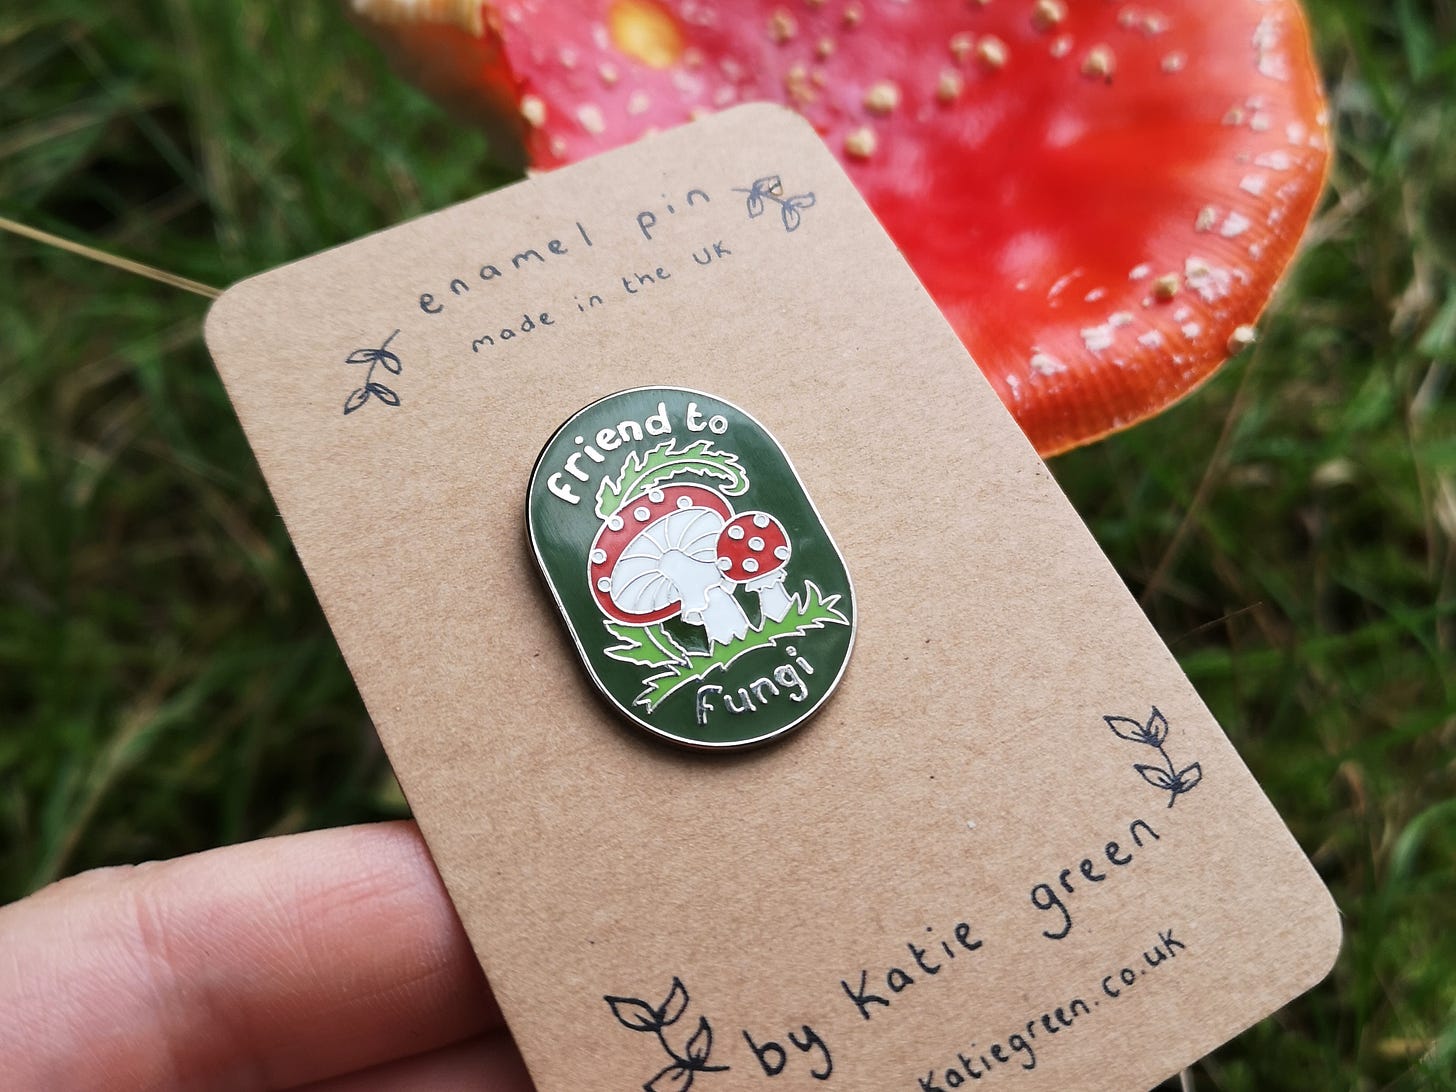 Image description: a white person's hand holding a brown card bearing a cute shiny enamel pin. It's oval shaped with a dark green background. The design shows two cute fly agaric mushrooms snuggling up together with a frond of bracken arching over them. The text in silver says Friend to Fungi. In the background is a real fly agaric mushroom.